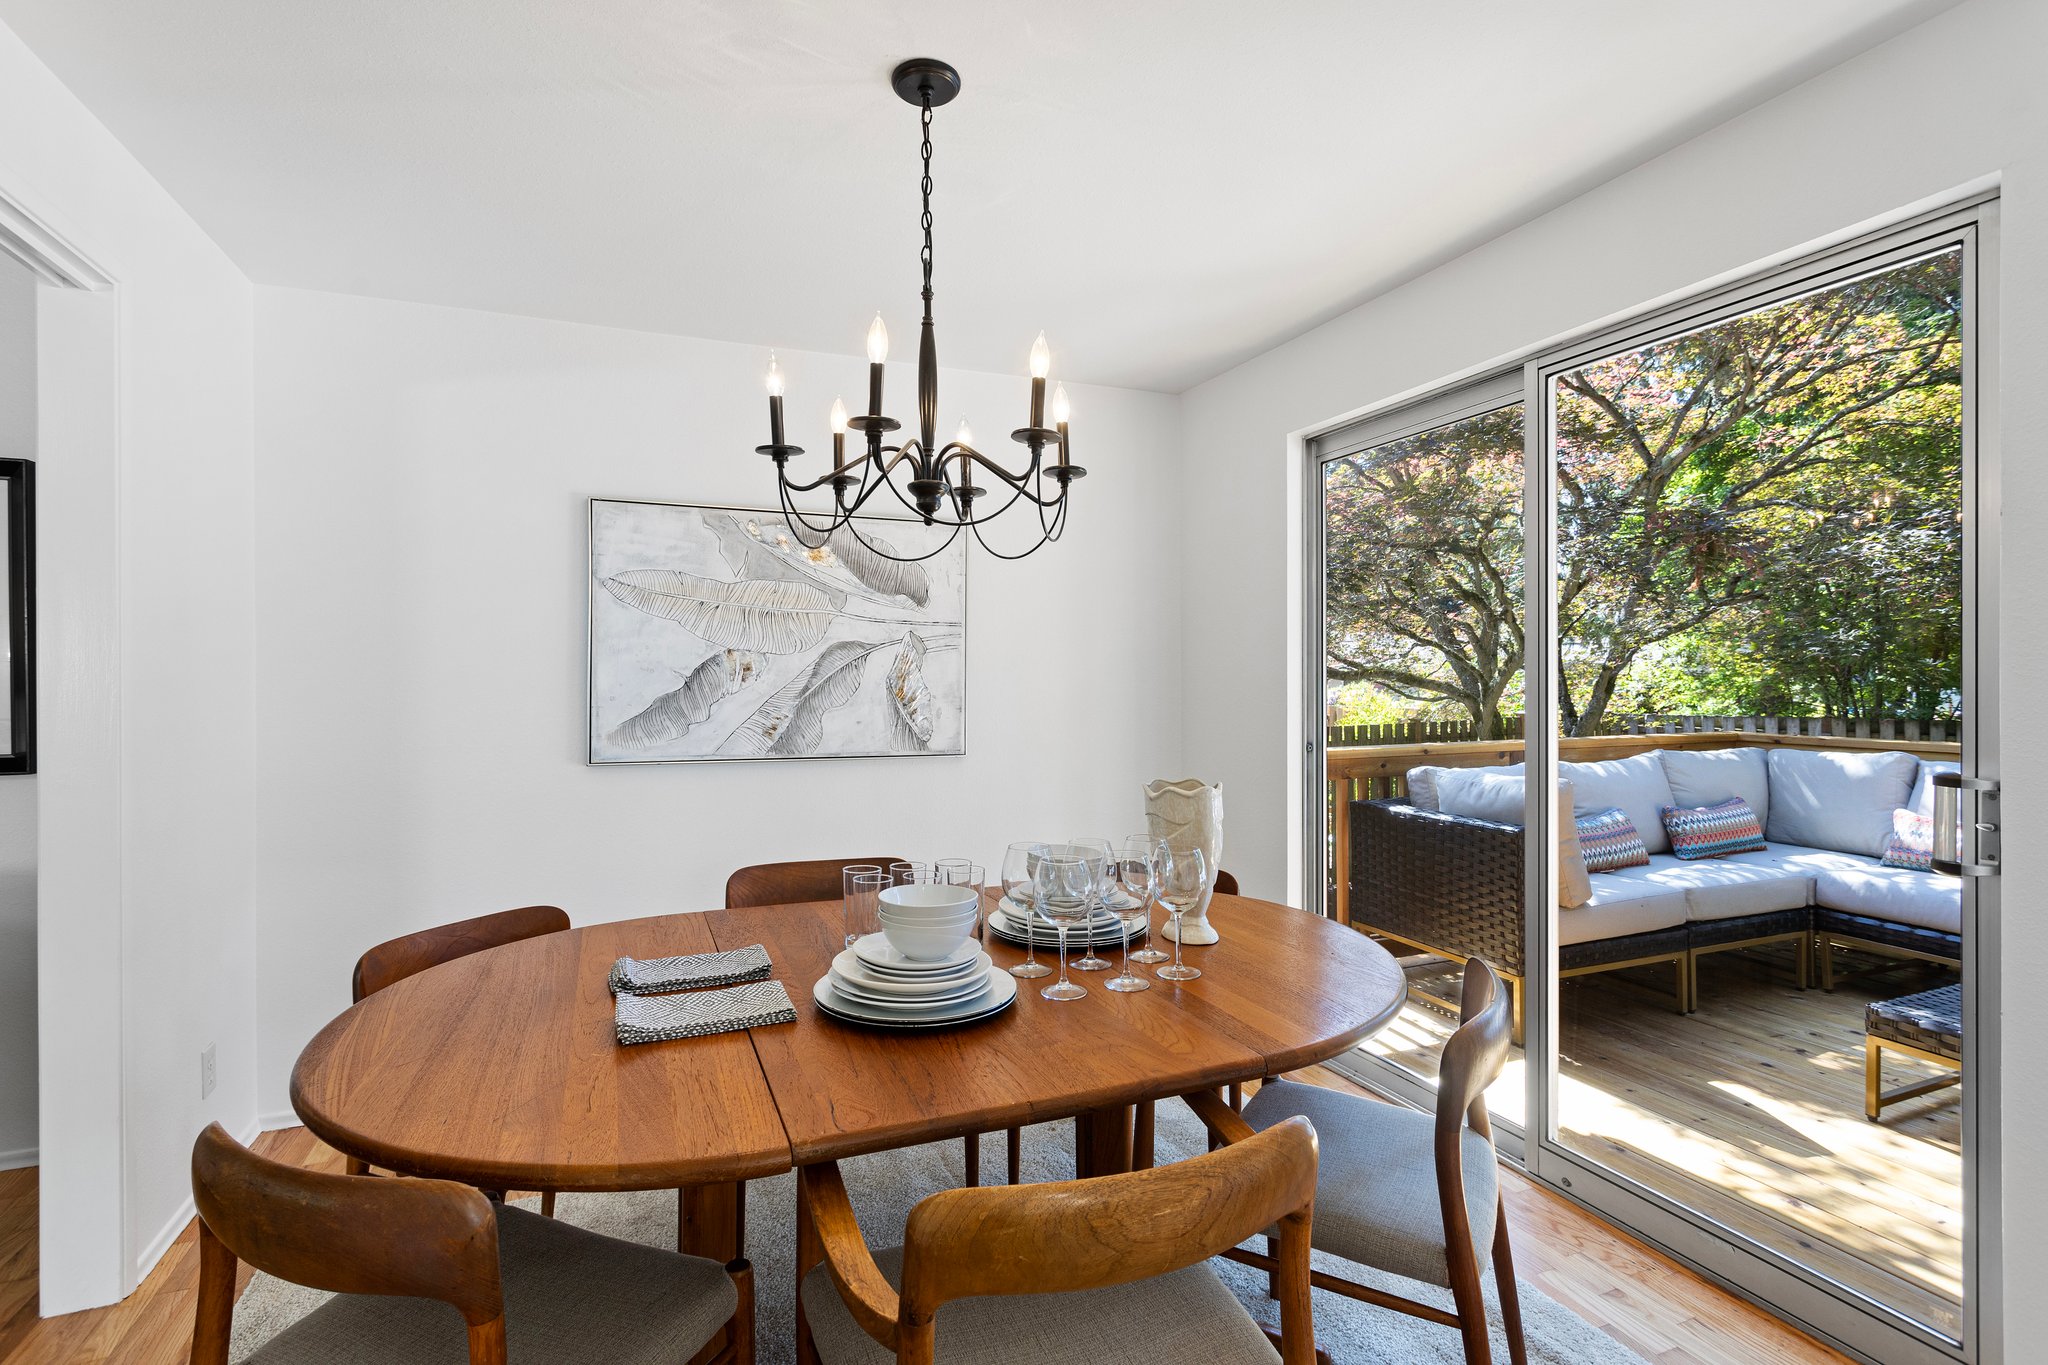 The dining room flows out to the sunny, spacious deck. The perfect floor plan for entertaining family and guests.